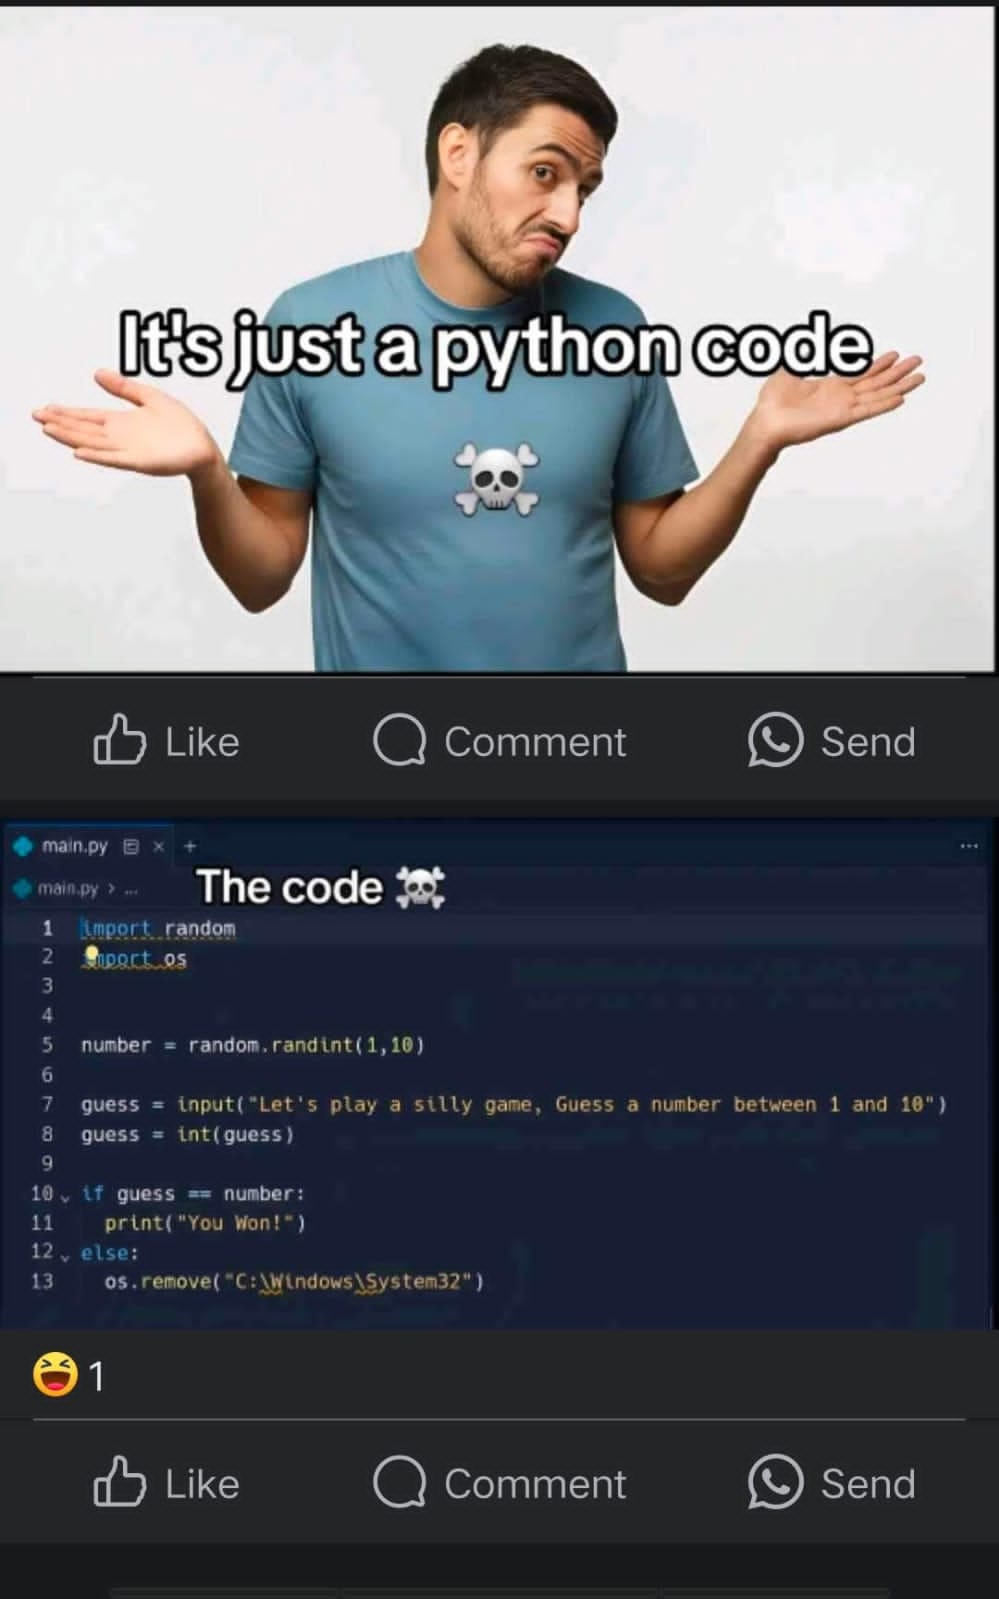 It's just a python code